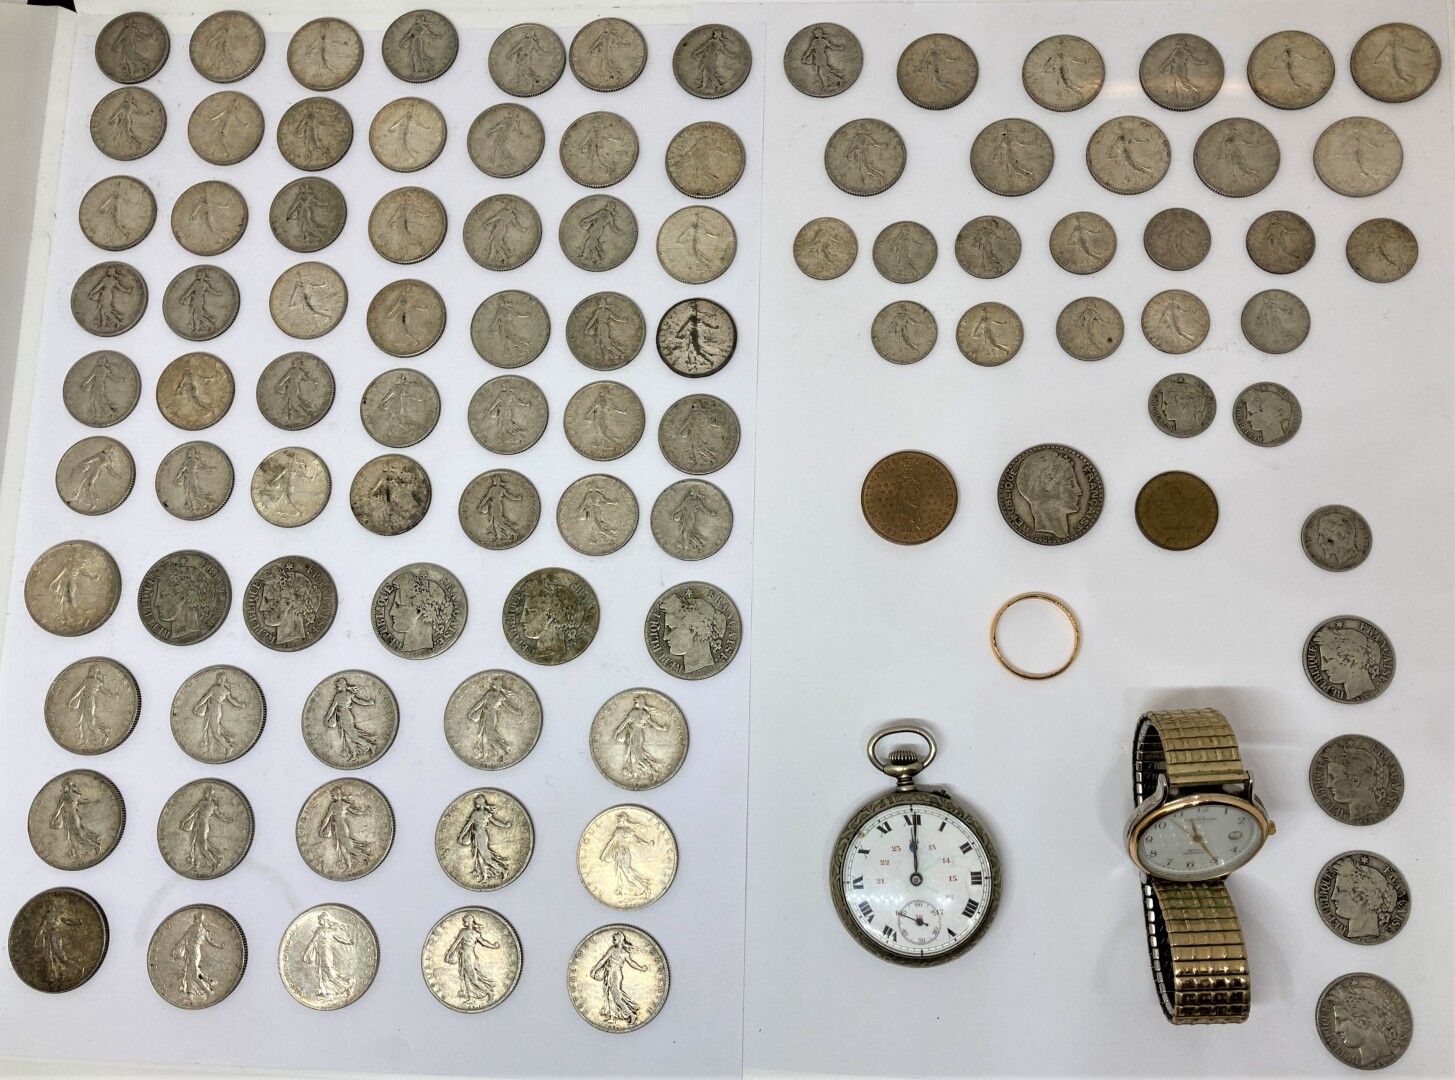 Null A lot of francs and foreign coins

One joined there:

A quartz watch

A sil&hellip;